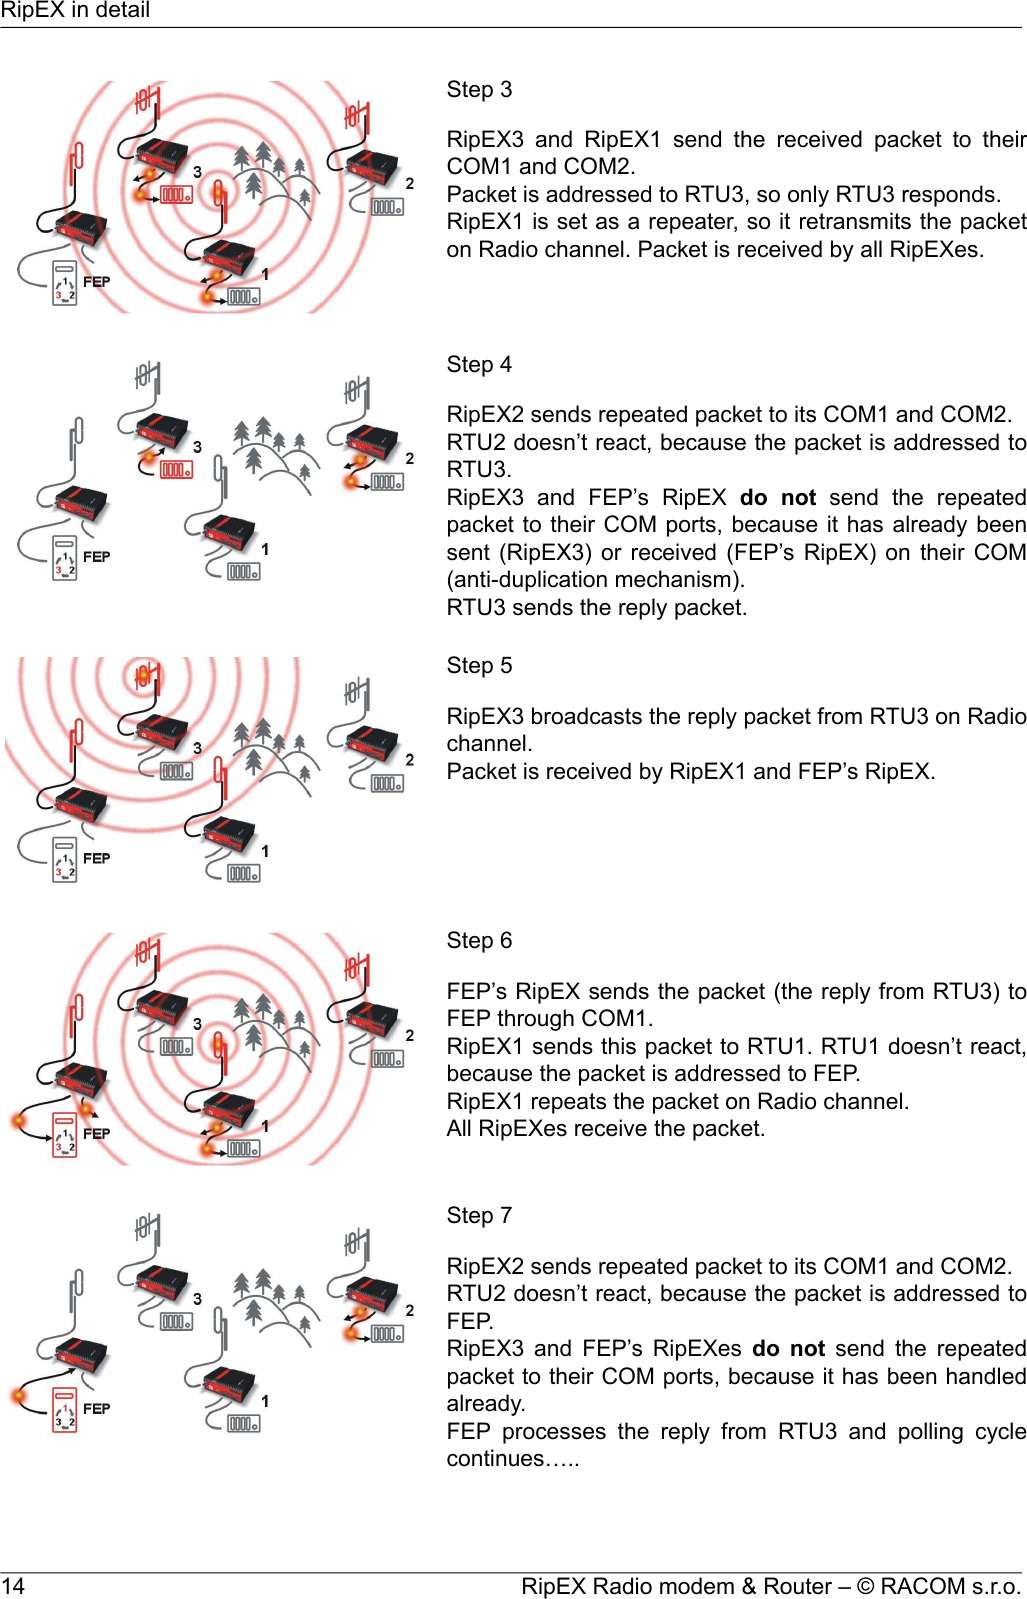 Step 3RipEX3 and RipEX1 send the received packet to theirCOM1 and COM2.Packet is addressed to RTU3, so only RTU3 responds.RipEX1 is set as a repeater, so it retransmits the packeton Radio channel. Packet is received by all RipEXes.Step 4RipEX2 sends repeated packet to its COM1 and COM2.RTU2 doesn’t react, because the packet is addressed toRTU3.RipEX3 and FEP’s RipEX do not send the repeatedpacket to their COM ports, because it has already beensent (RipEX3) or received (FEP’s RipEX) on their COM(anti-duplication mechanism).RTU3 sends the reply packet.Step 5RipEX3 broadcasts the reply packet from RTU3 on Radiochannel.Packet is received by RipEX1 and FEP’s RipEX.Step 6FEP’s RipEX sends the packet (the reply from RTU3) toFEP through COM1.RipEX1 sends this packet to RTU1. RTU1 doesn’t react,because the packet is addressed to FEP.RipEX1 repeats the packet on Radio channel.All RipEXes receive the packet.Step 7RipEX2 sends repeated packet to its COM1 and COM2.RTU2 doesn’t react, because the packet is addressed toFEP.RipEX3 and FEP’s RipEXes do not send the repeatedpacket to their COM ports, because it has been handledalready.FEP processes the reply from RTU3 and polling cyclecontinues…..RipEX Radio modem &amp; Router – © RACOM s.r.o.14RipEX in detail